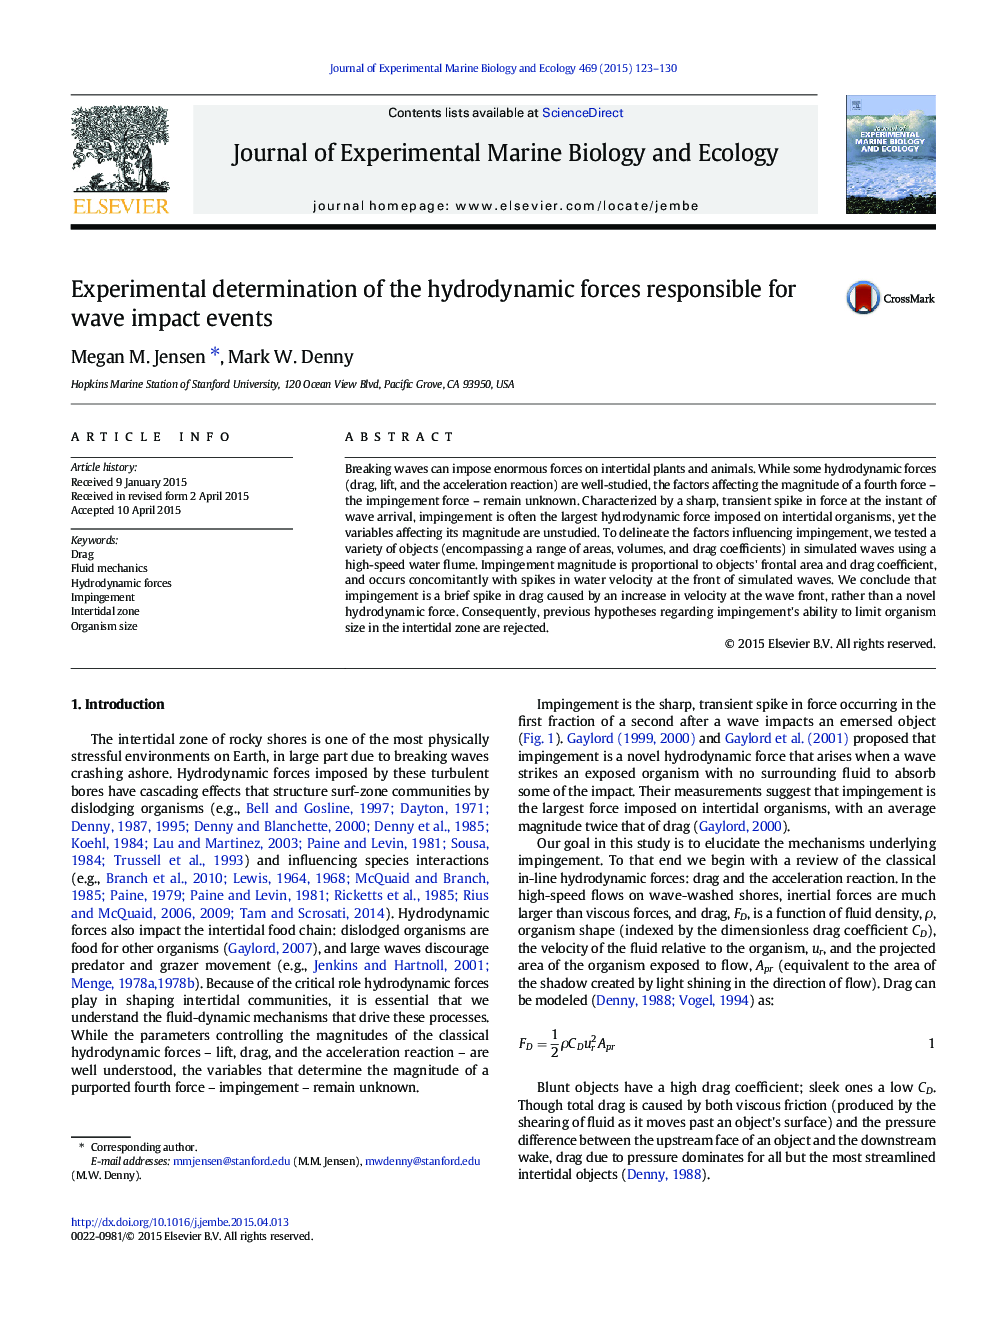 Experimental determination of the hydrodynamic forces responsible for wave impact events